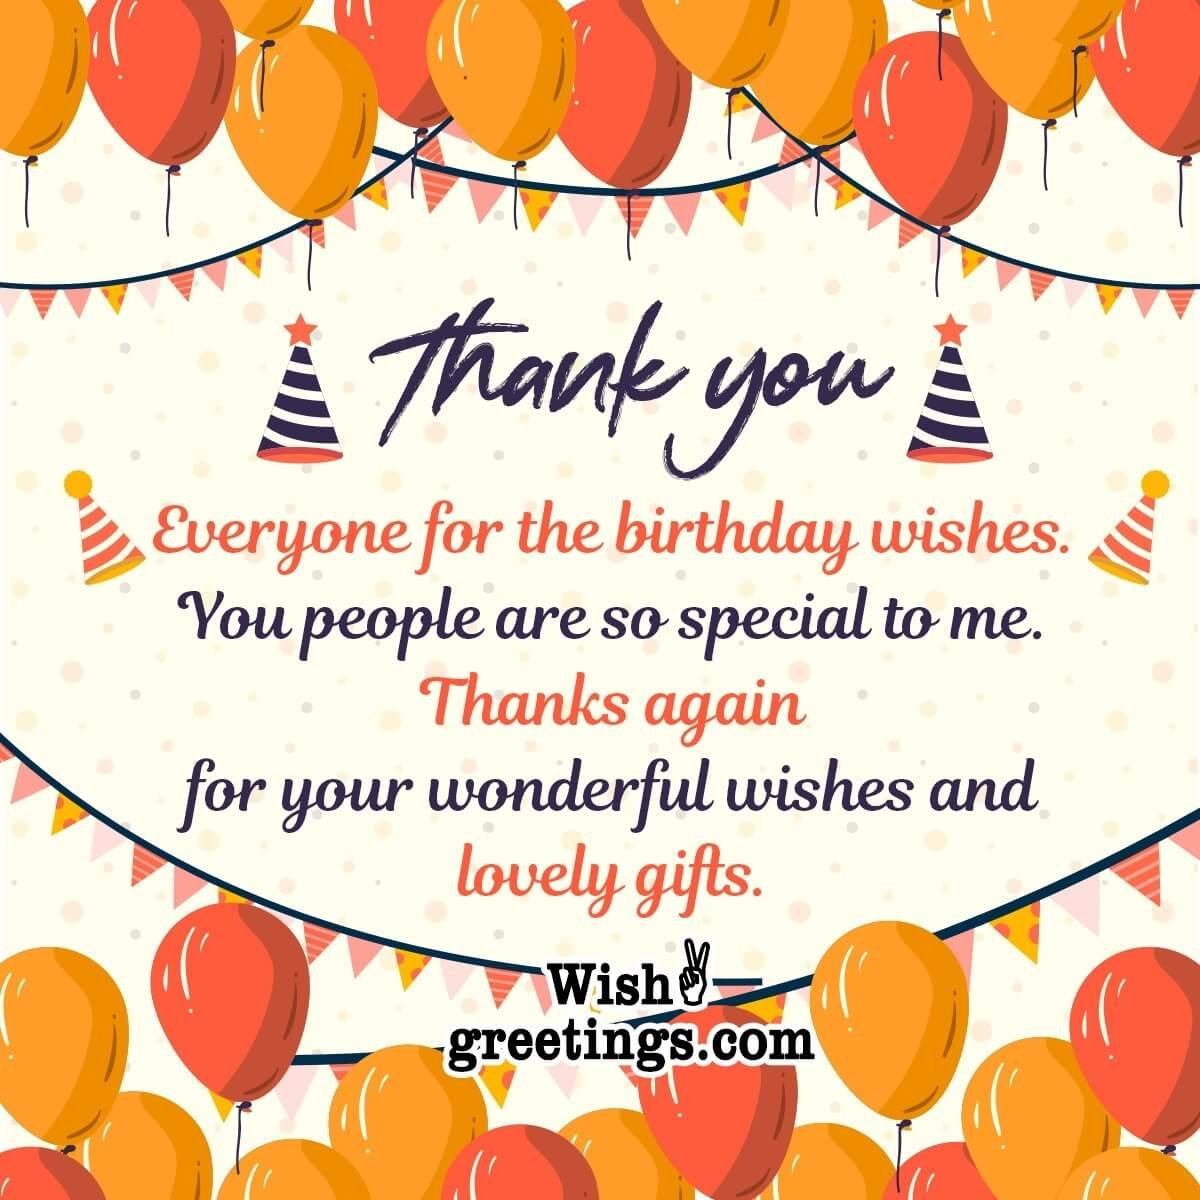 thank-you-for-birthday-wishes-on-facebook-wish-greetings